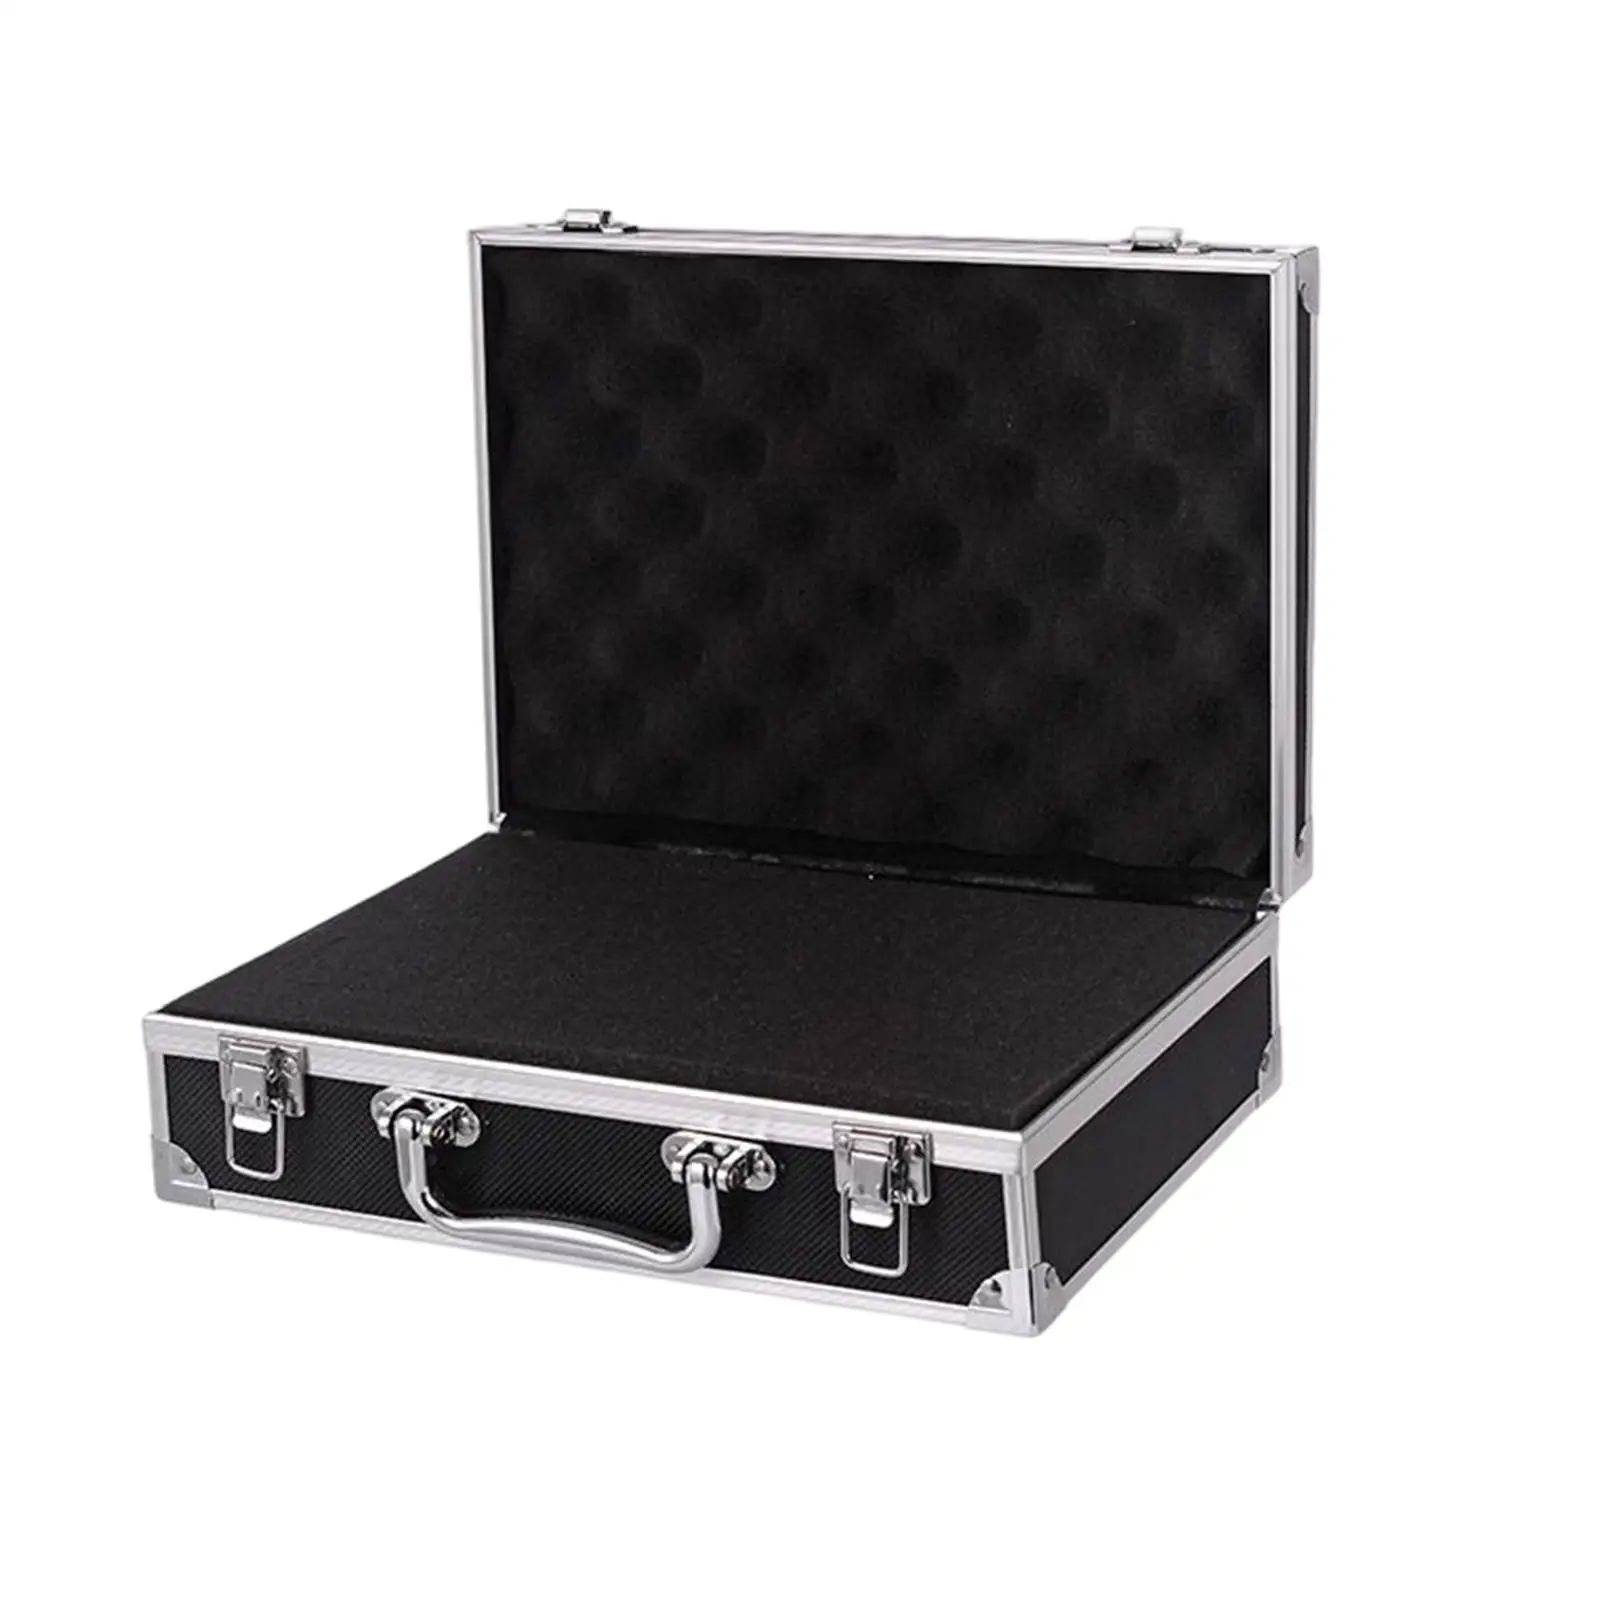 Briefcase File Storage Box Safety Equipment Hardware Lightweight Display Case Waterproof Carrying Case